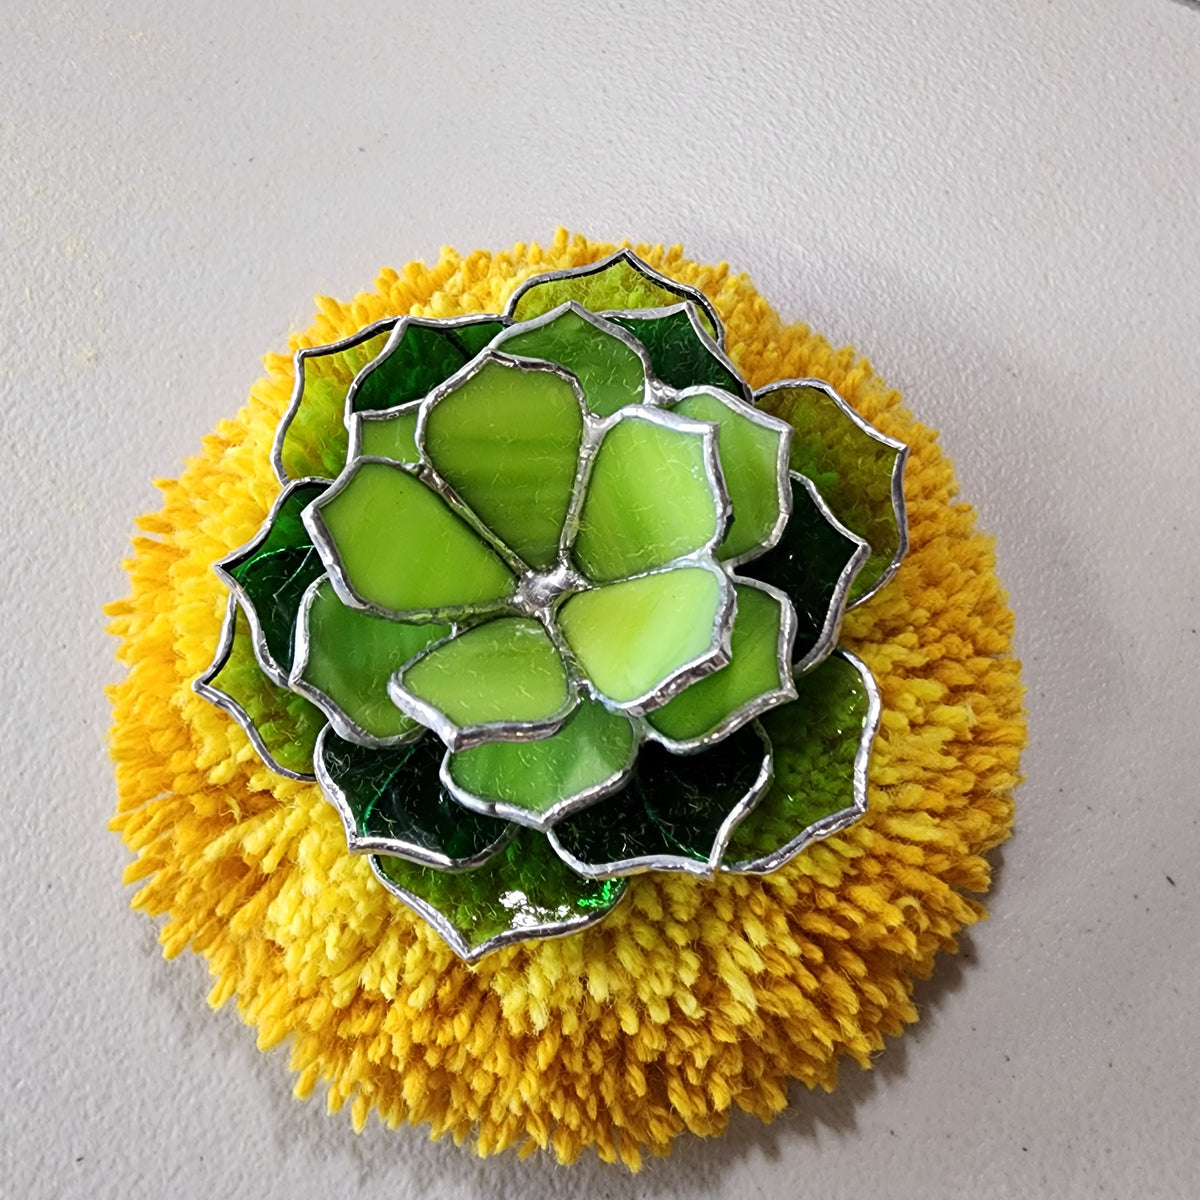 Glass succulent on a fluffy wool Rug